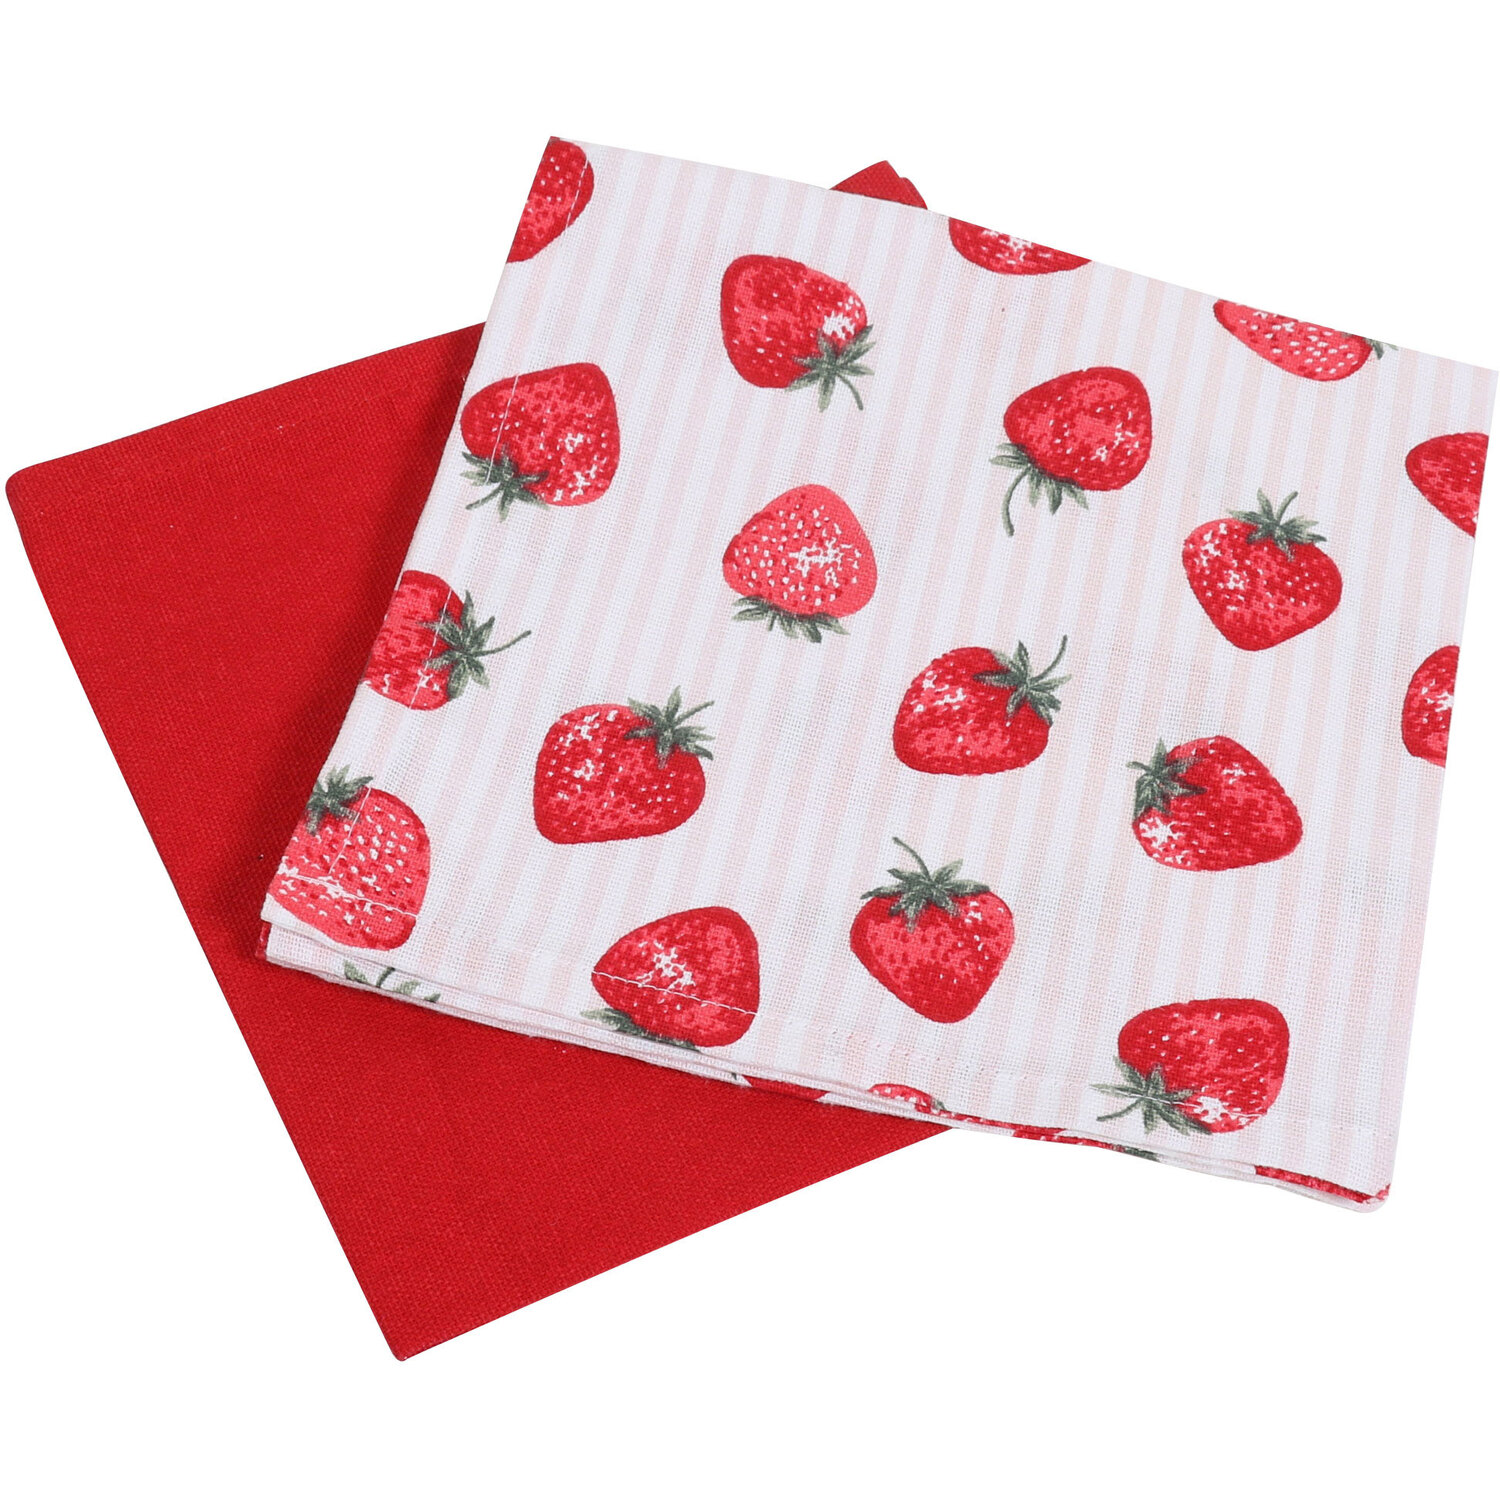 Pack of 2 Strawberry Napkins - Red Image 1